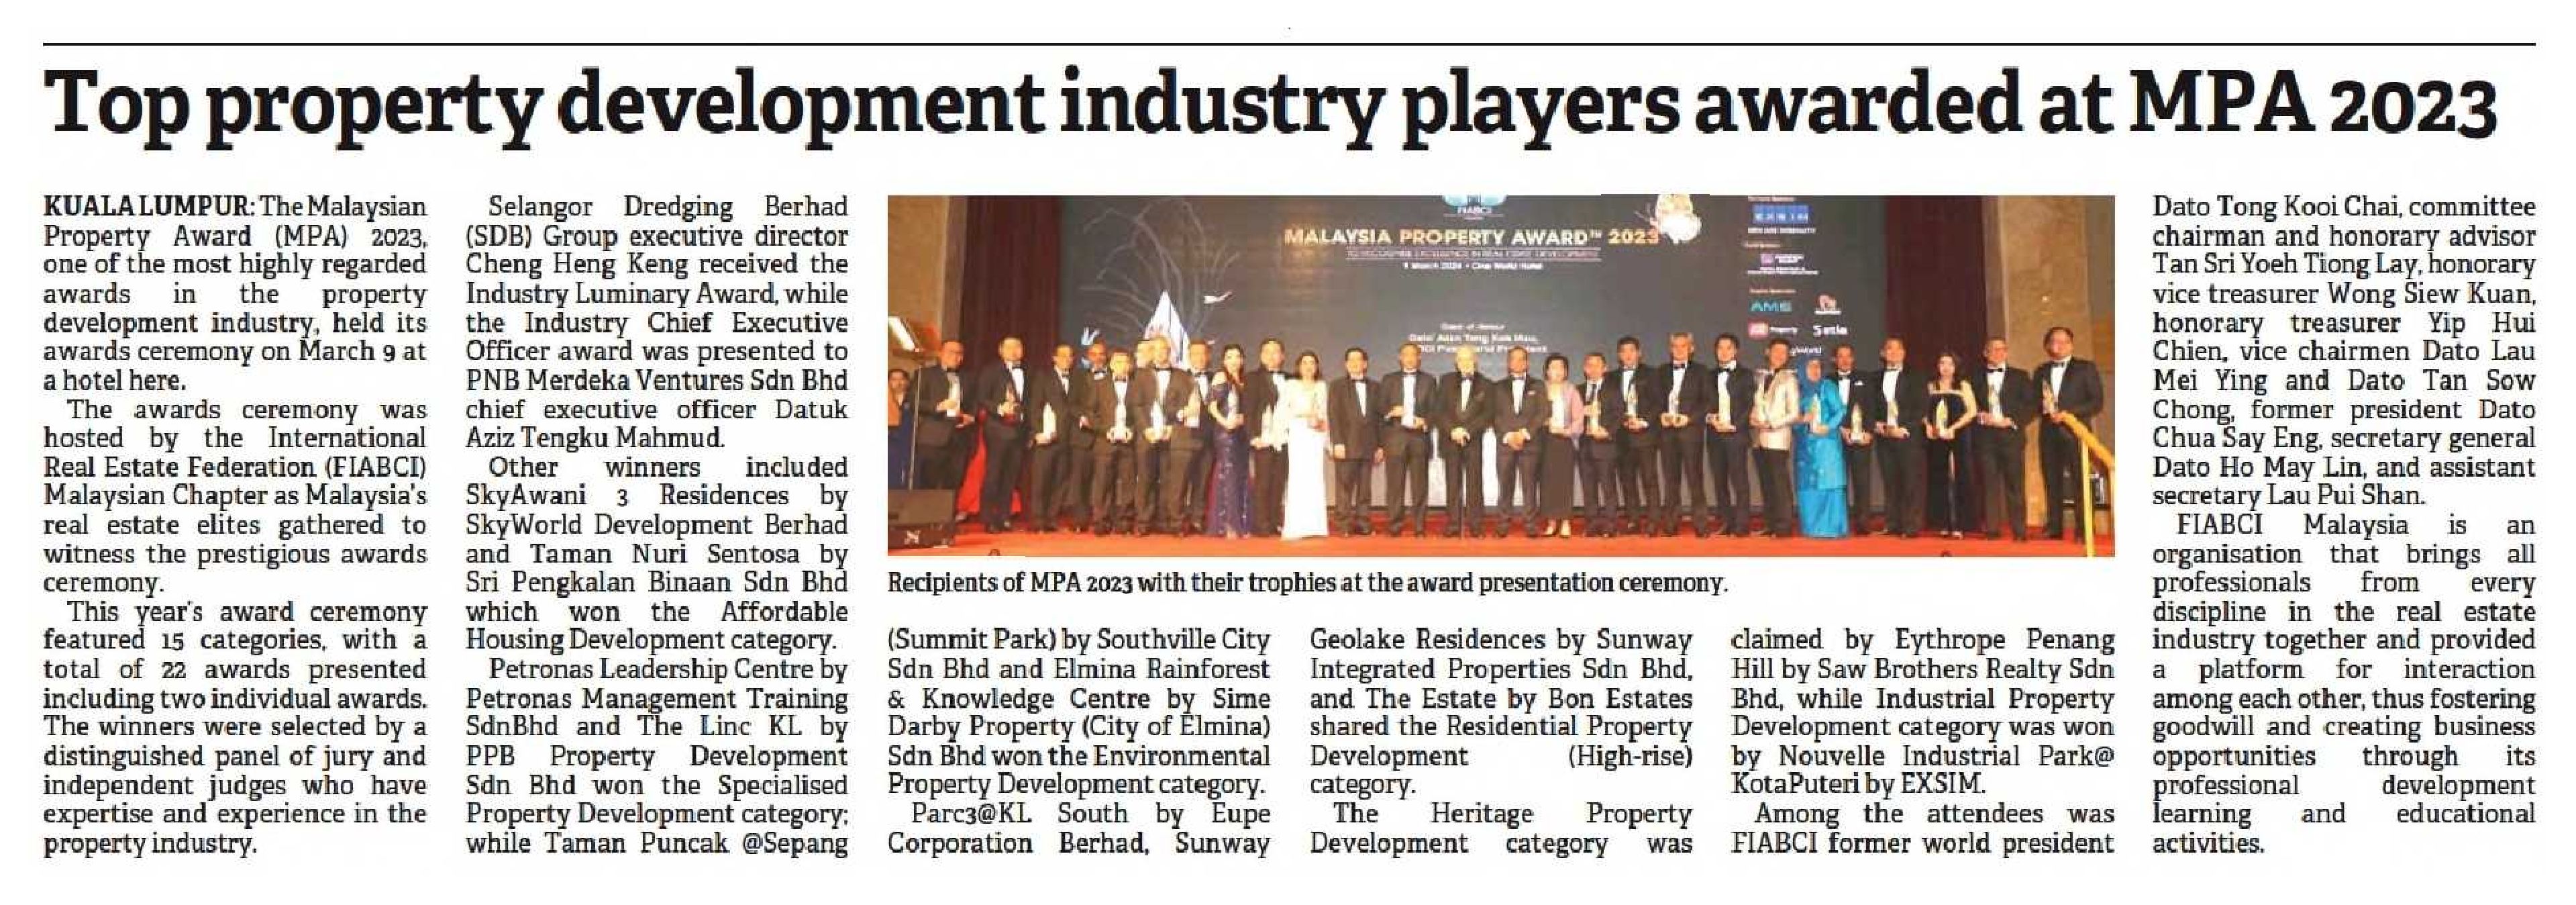 Top property development industry players awarded at MPA 2023